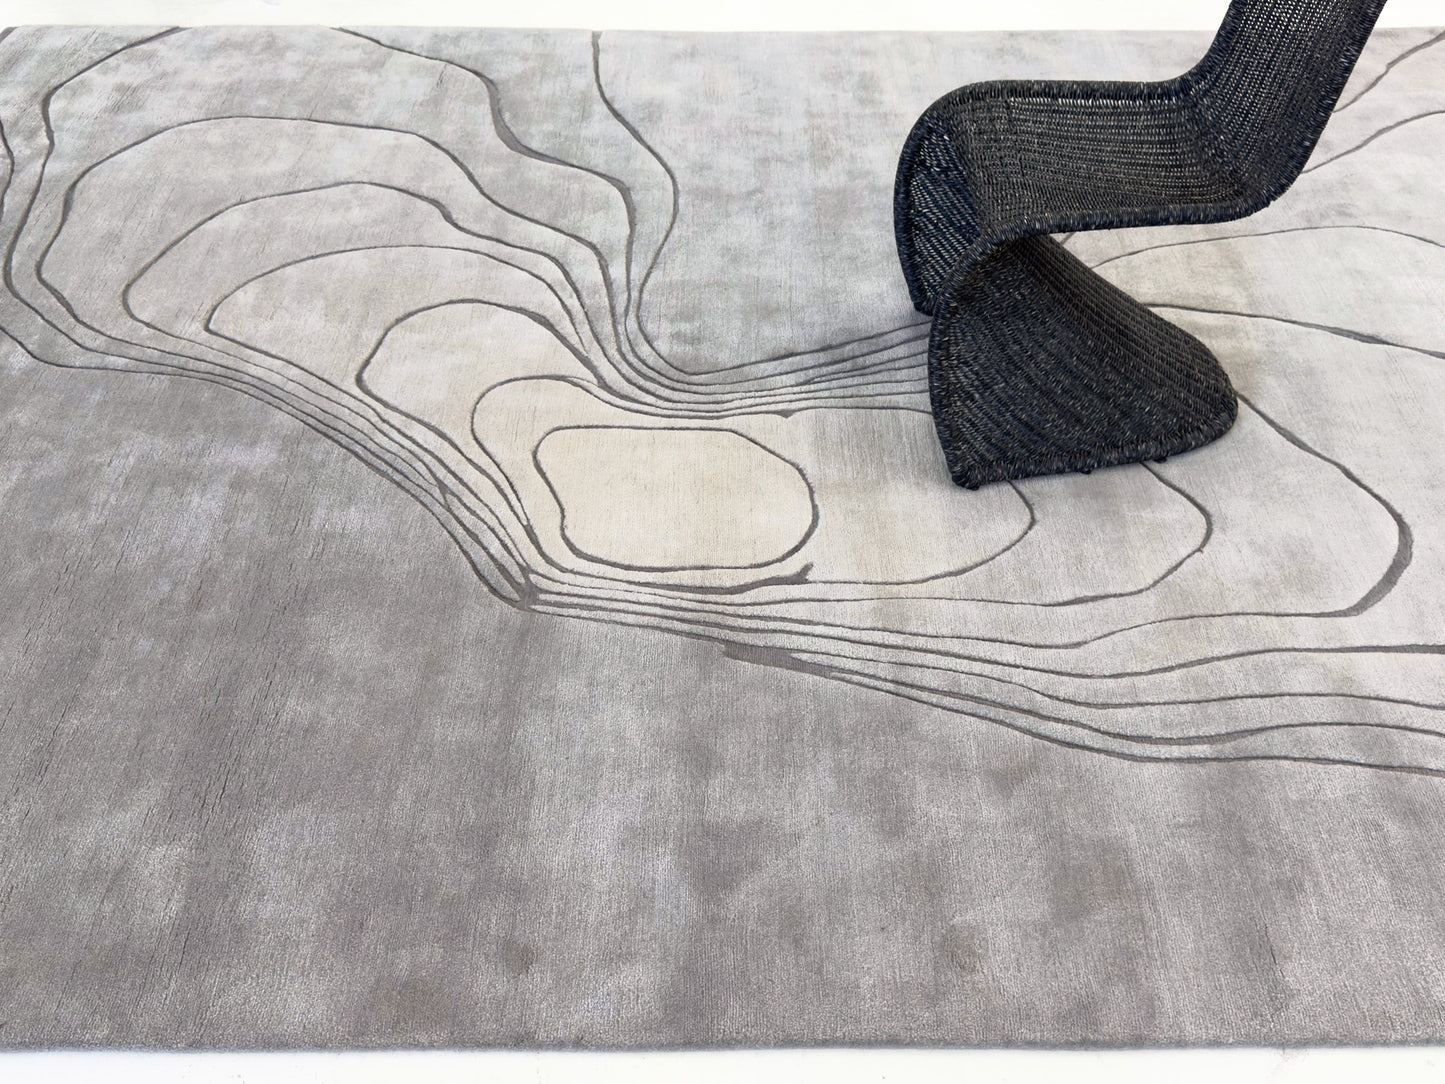 Modern Rug Image 2916 Echoes by Claudia Afshar